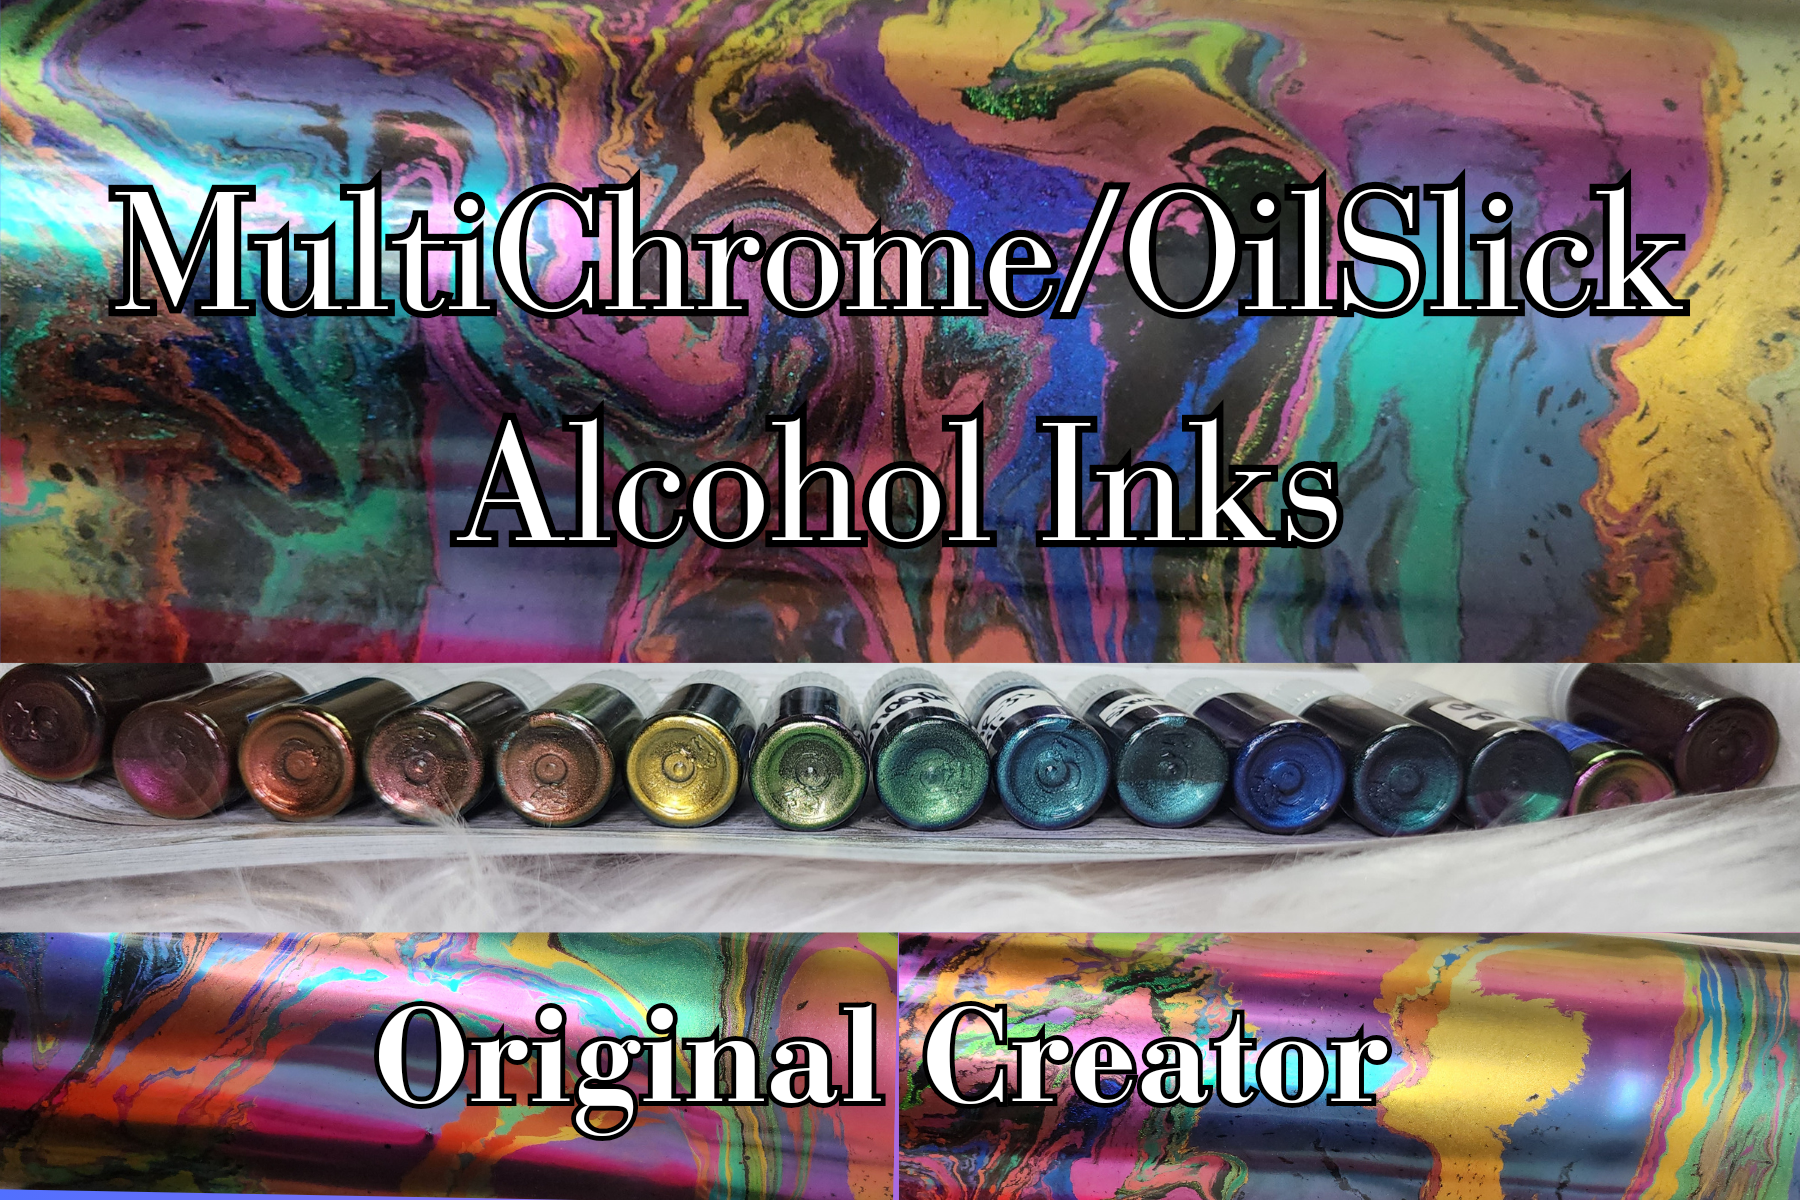 What are Alcohol Inks?